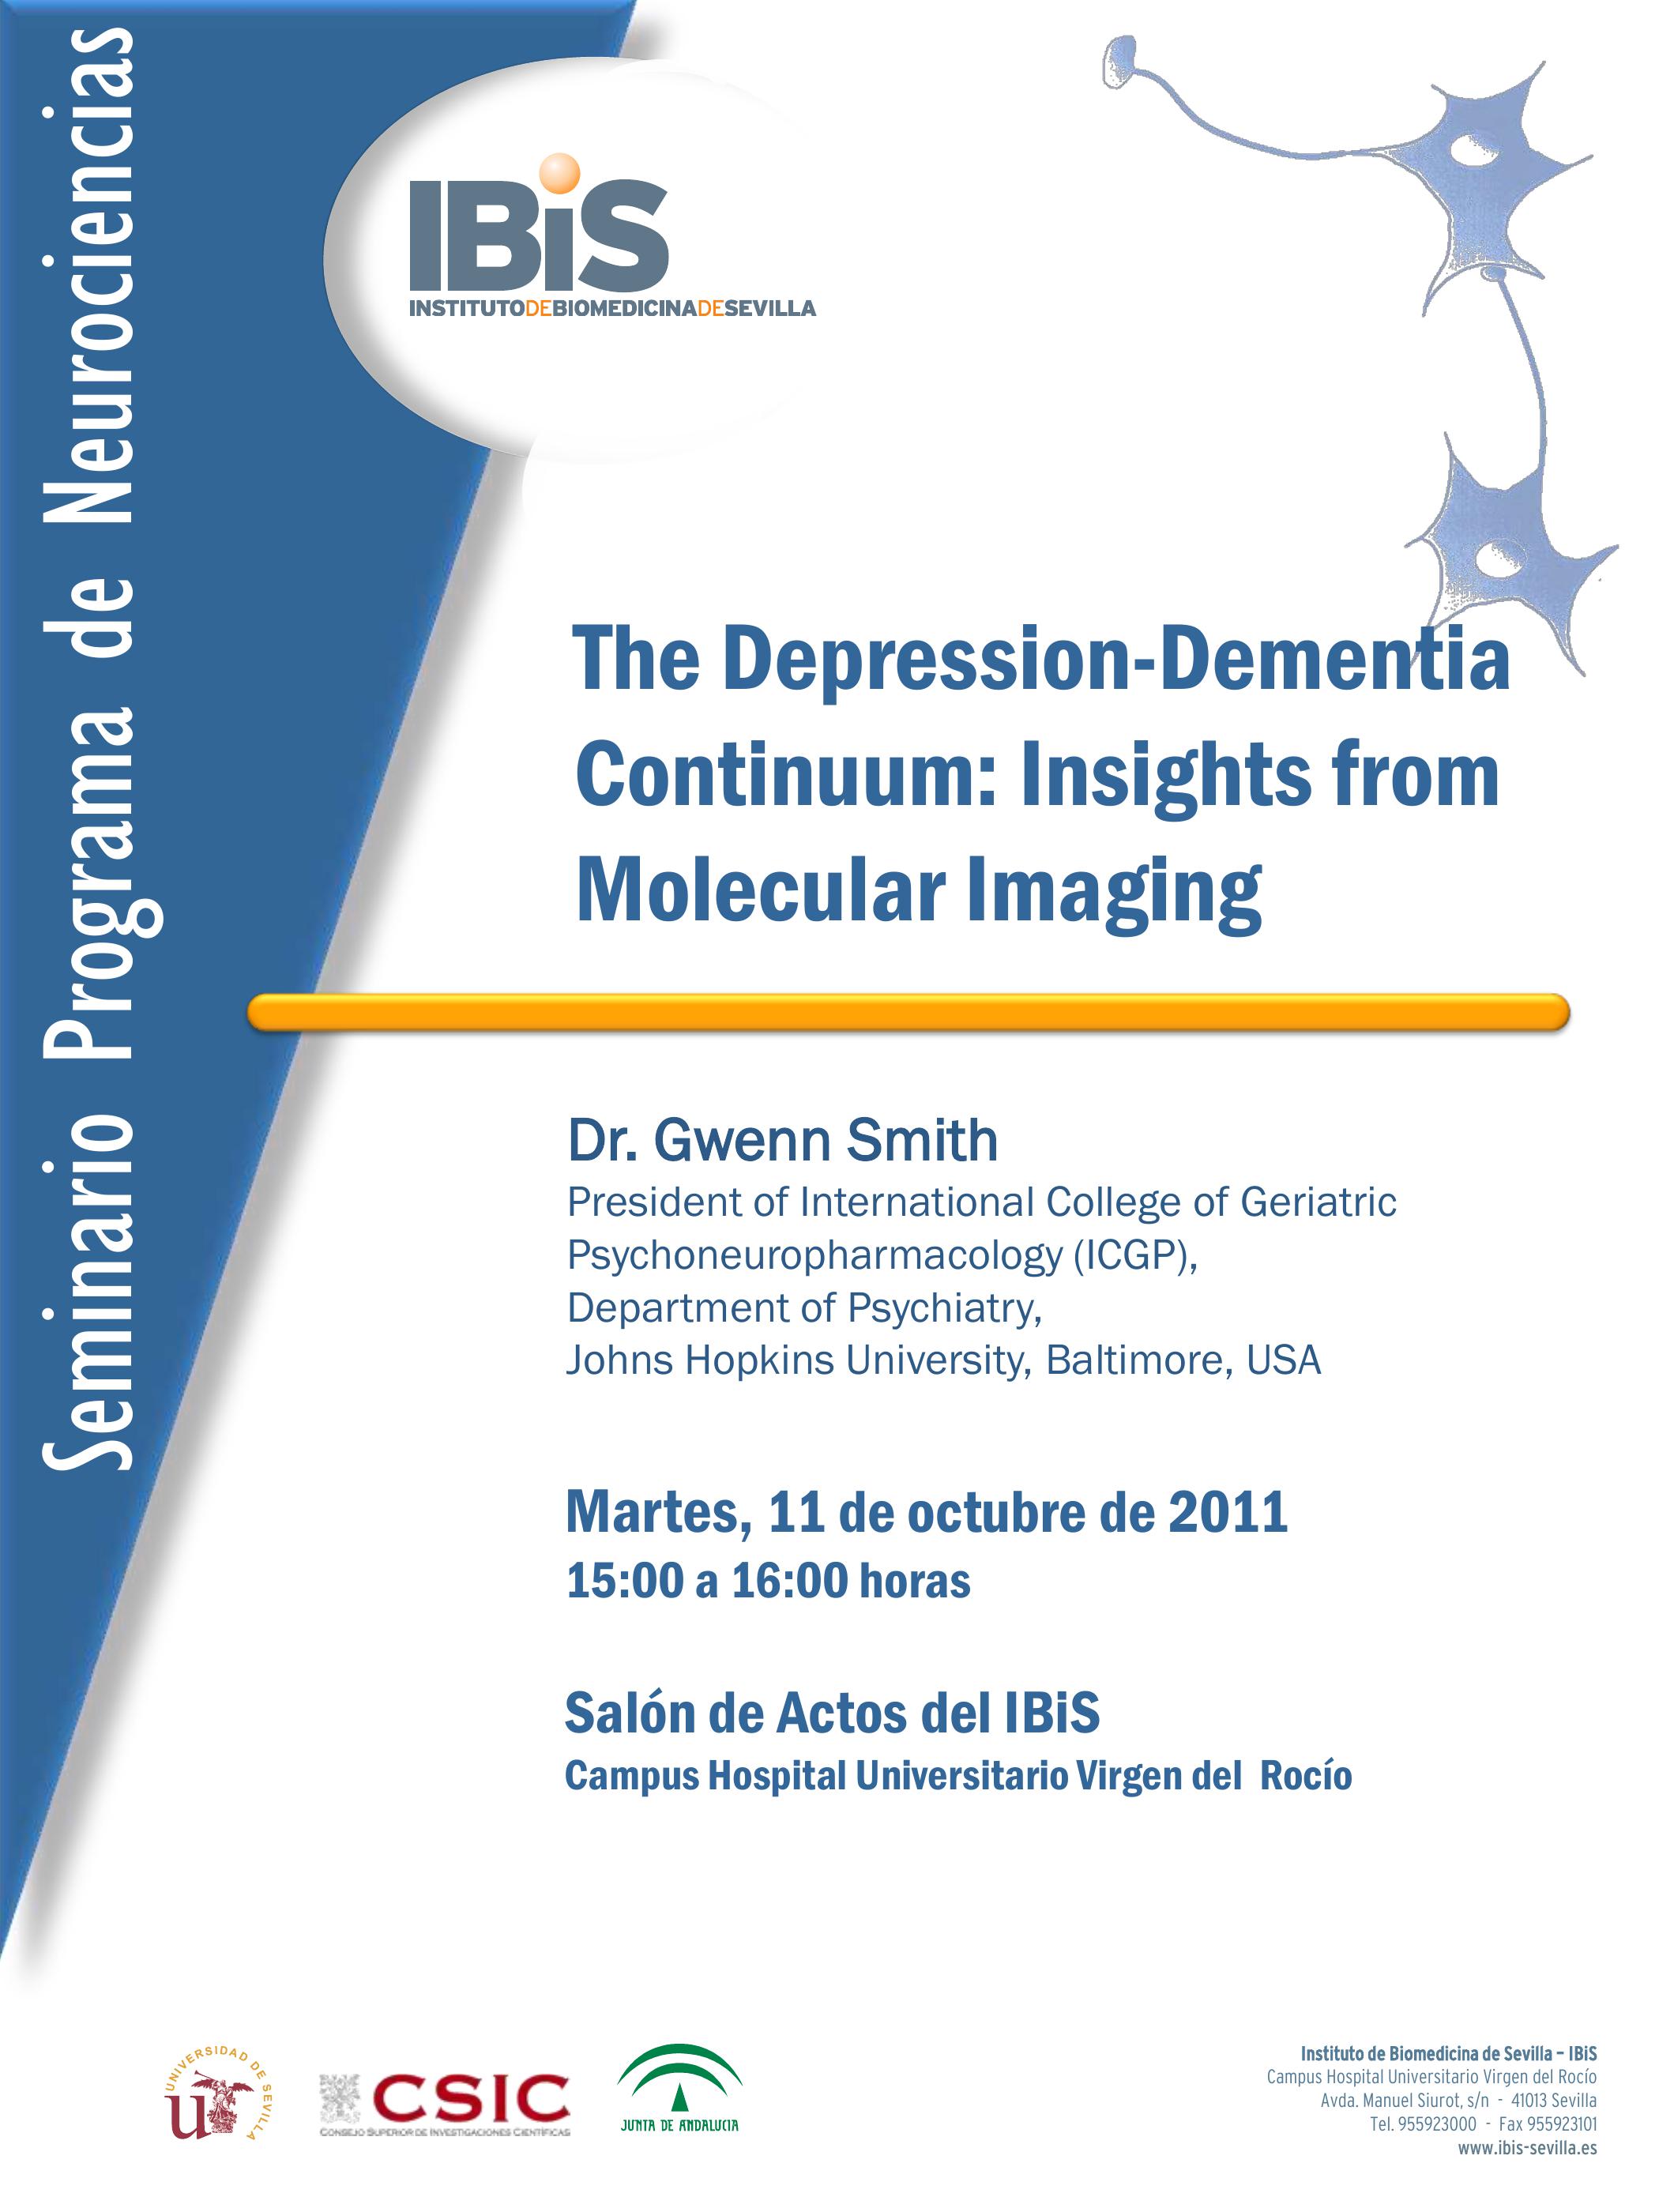 Poster: The Depression-Dementia Continuum: Insights from Molecular Imaging.